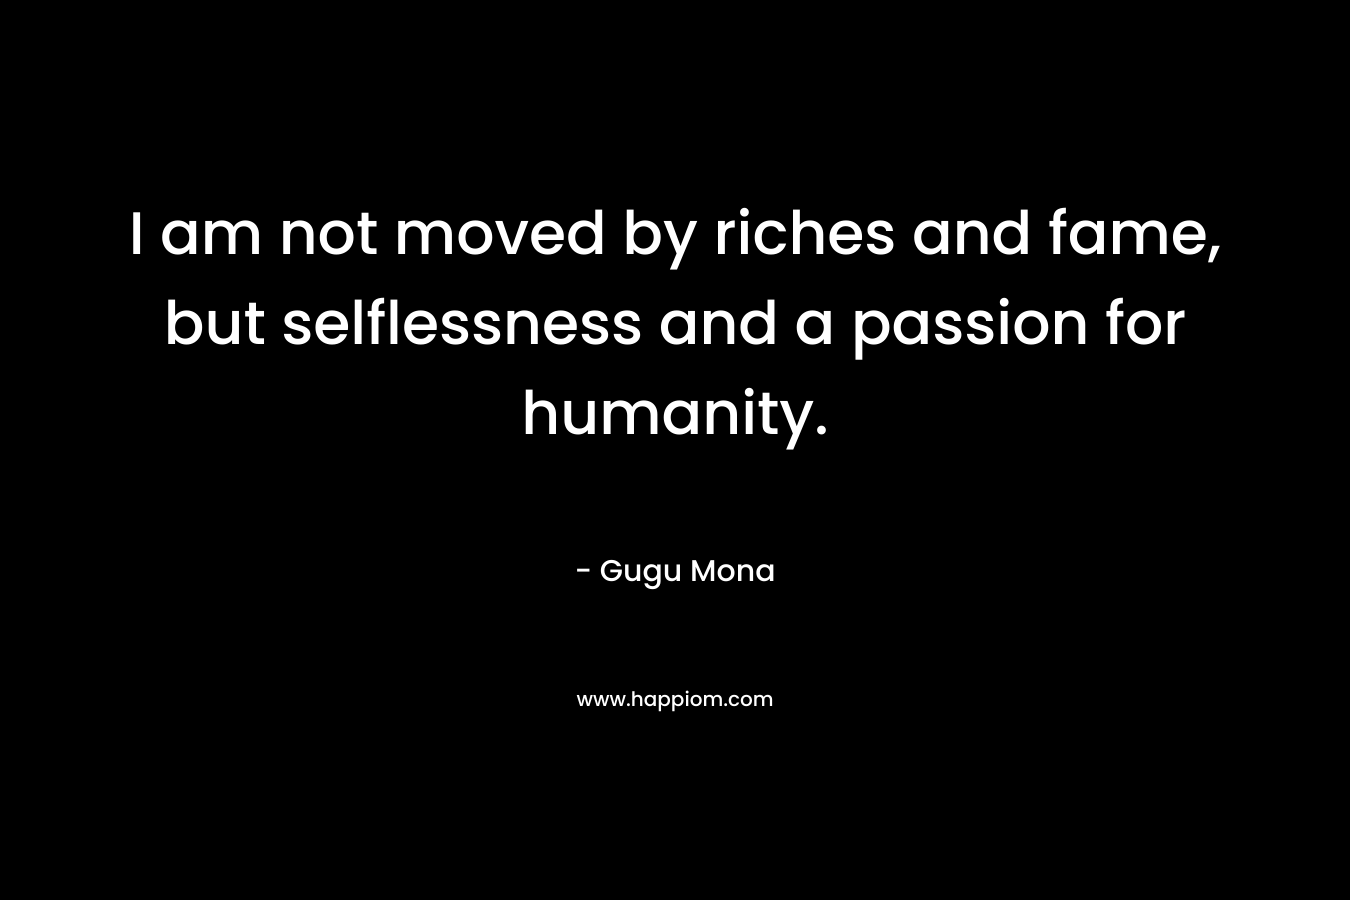 I am not moved by riches and fame, but selflessness and a passion for humanity.